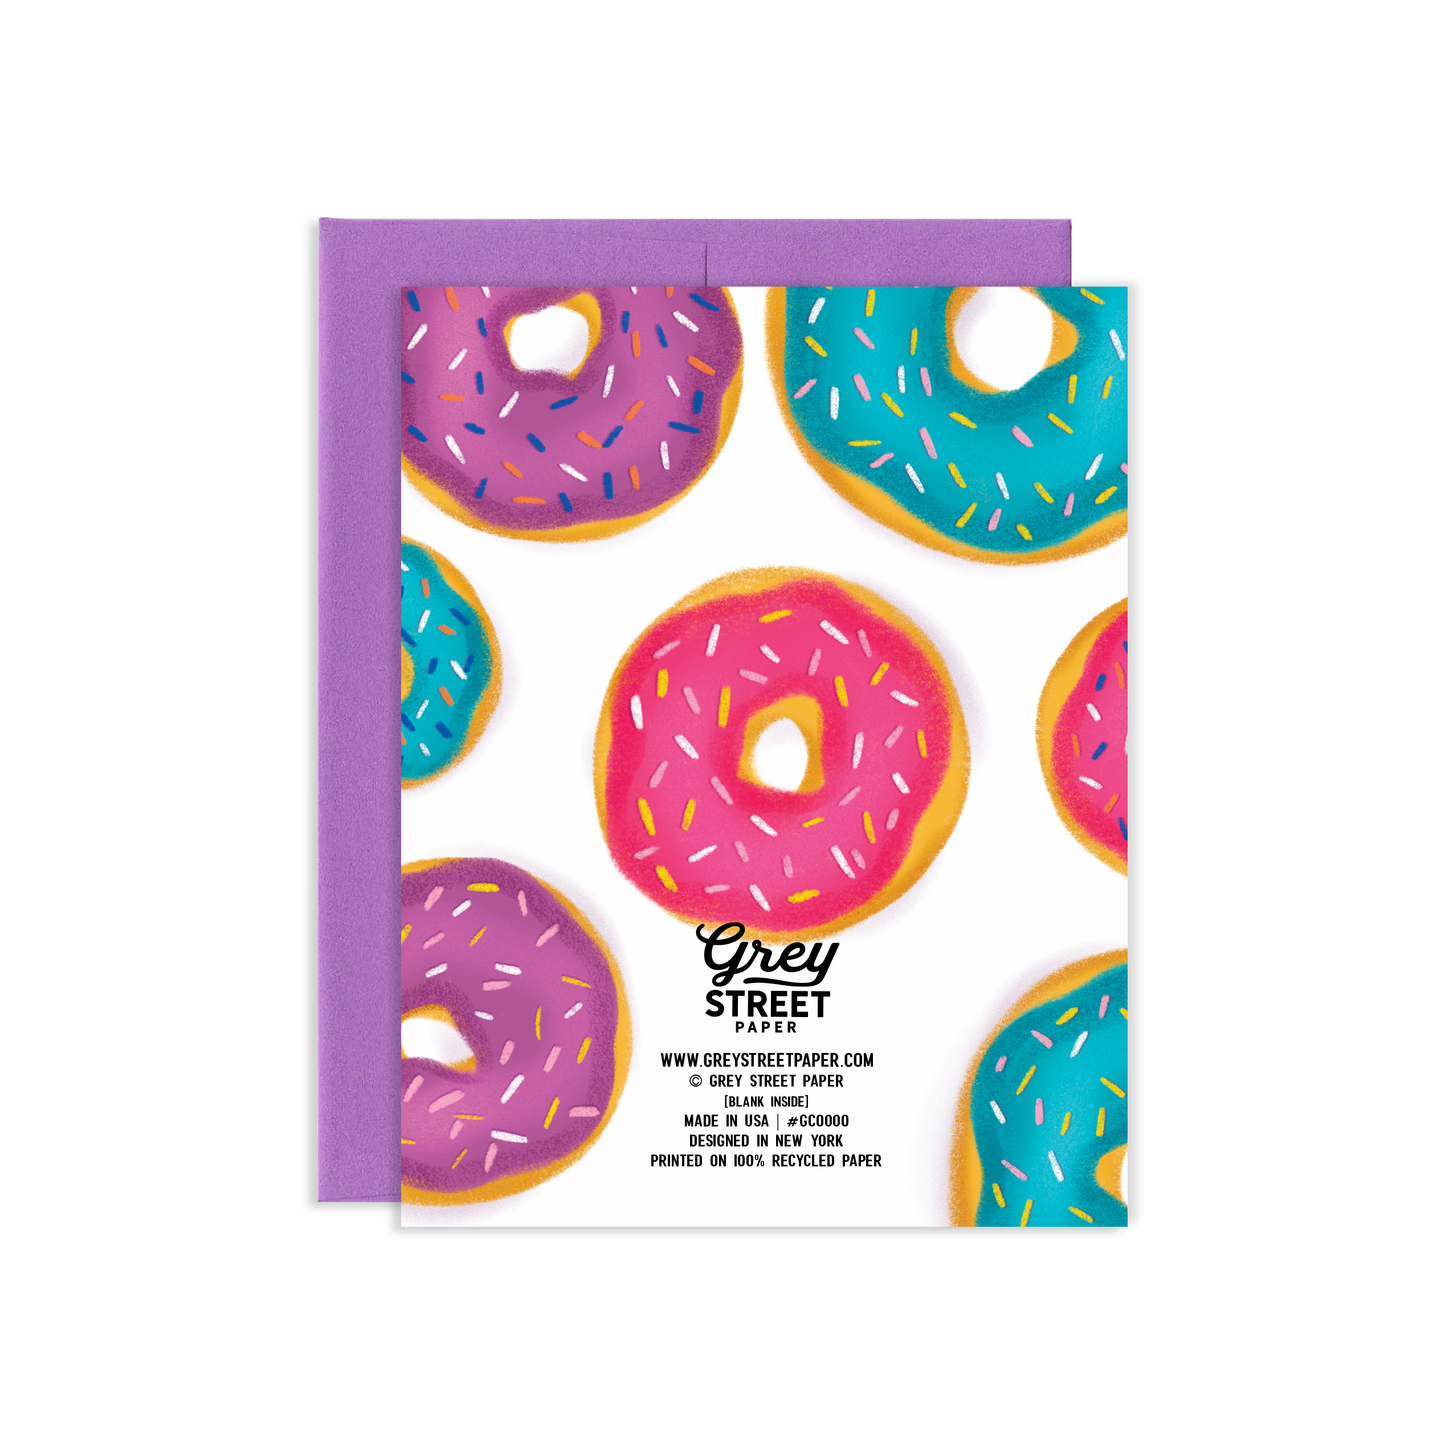 Thank You Dough Much Greeting Card